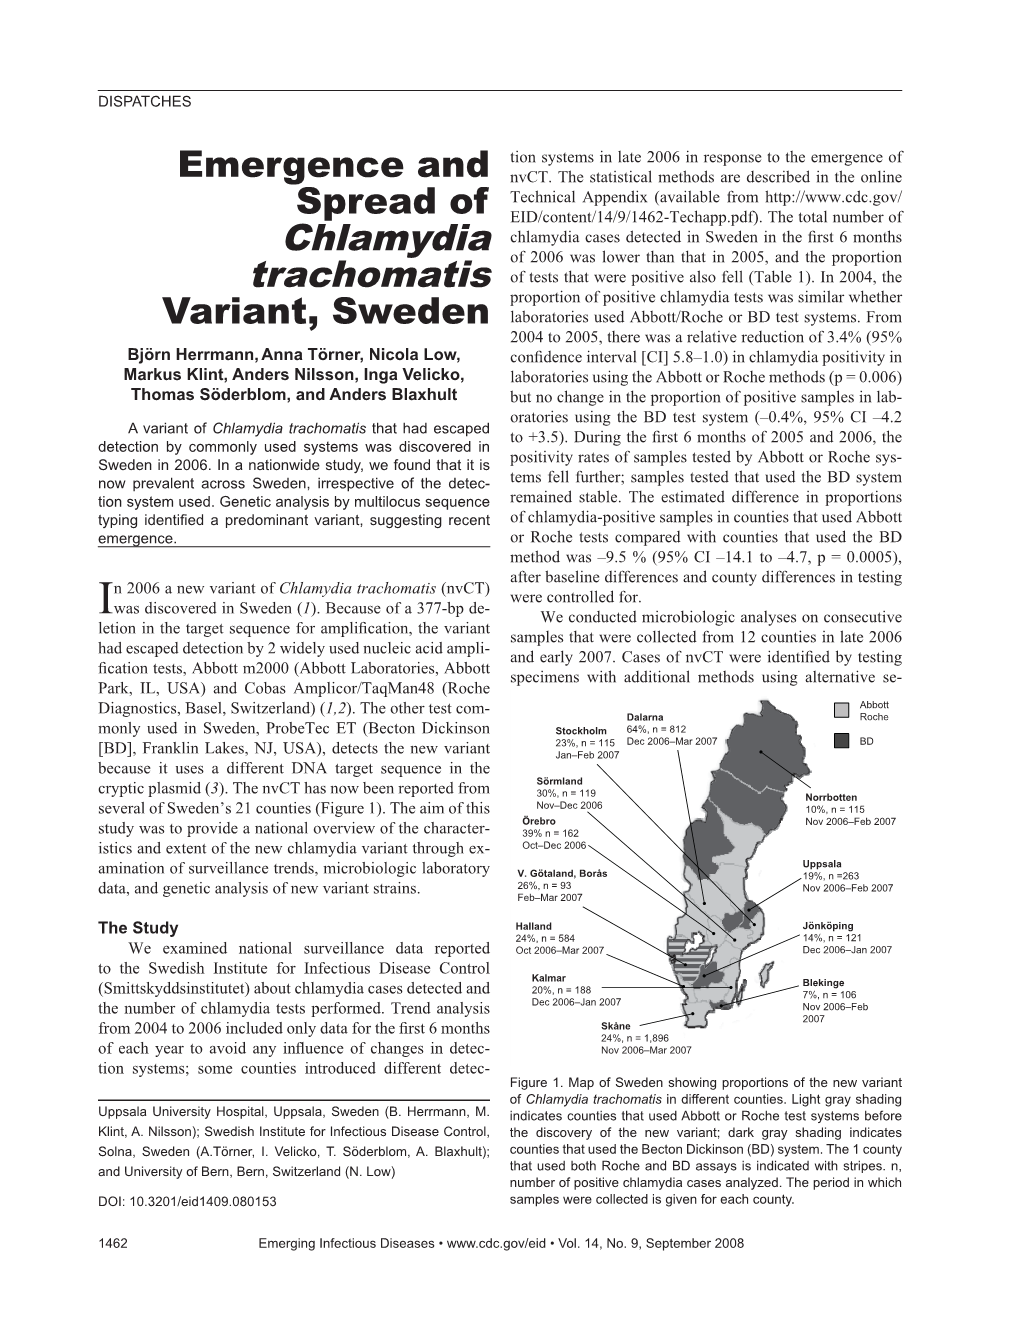 Emergence and Spread of Chlamydia Trachomatis Variant, Sweden